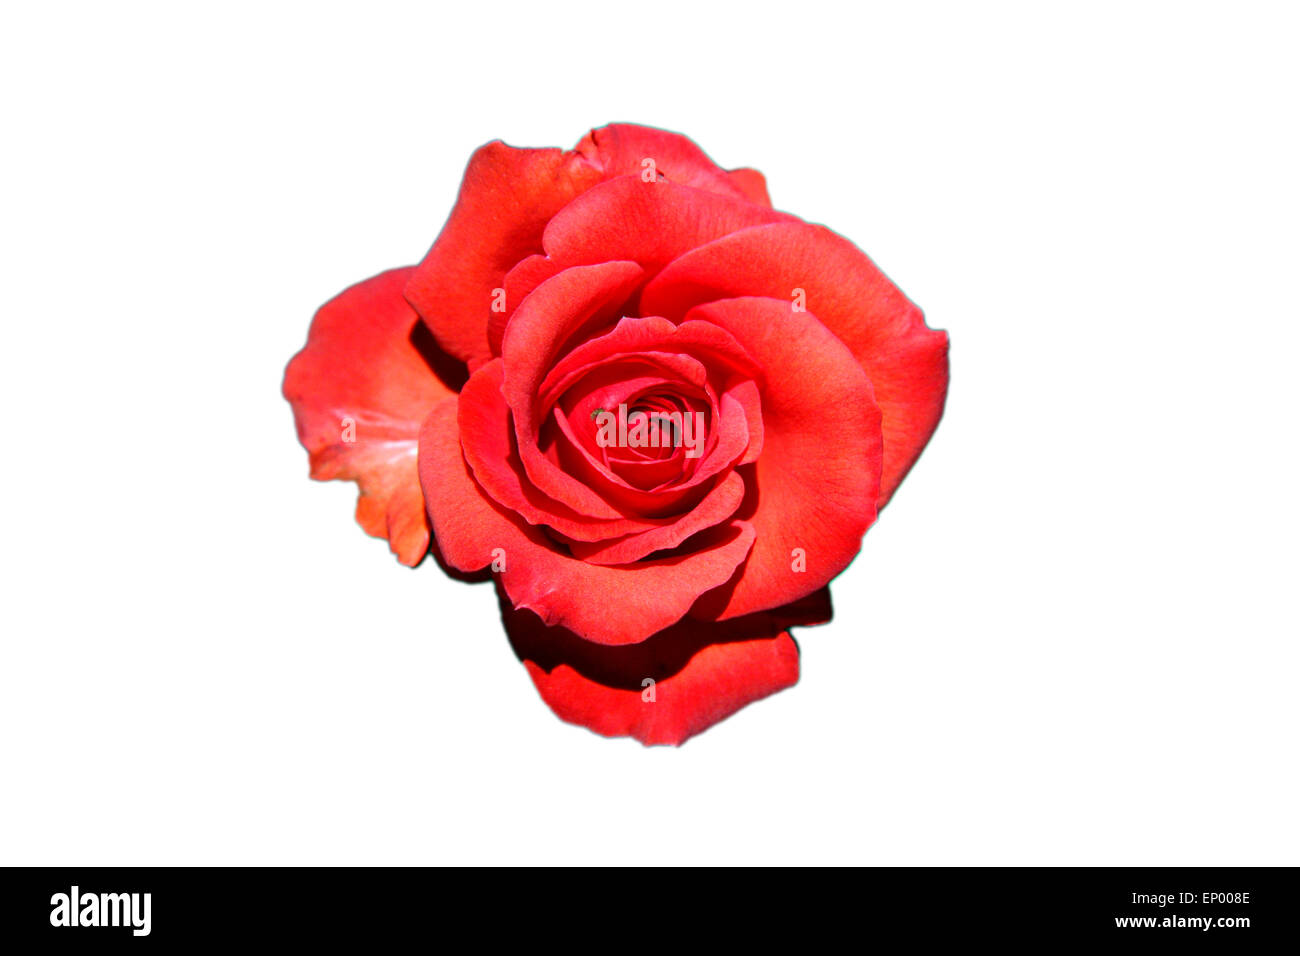 Rote Rose - Symbolbild Liebe/ Valentinstag/ red rose - symbolic image for love, afection and Valentines Day.berlin.de. Stock Photo